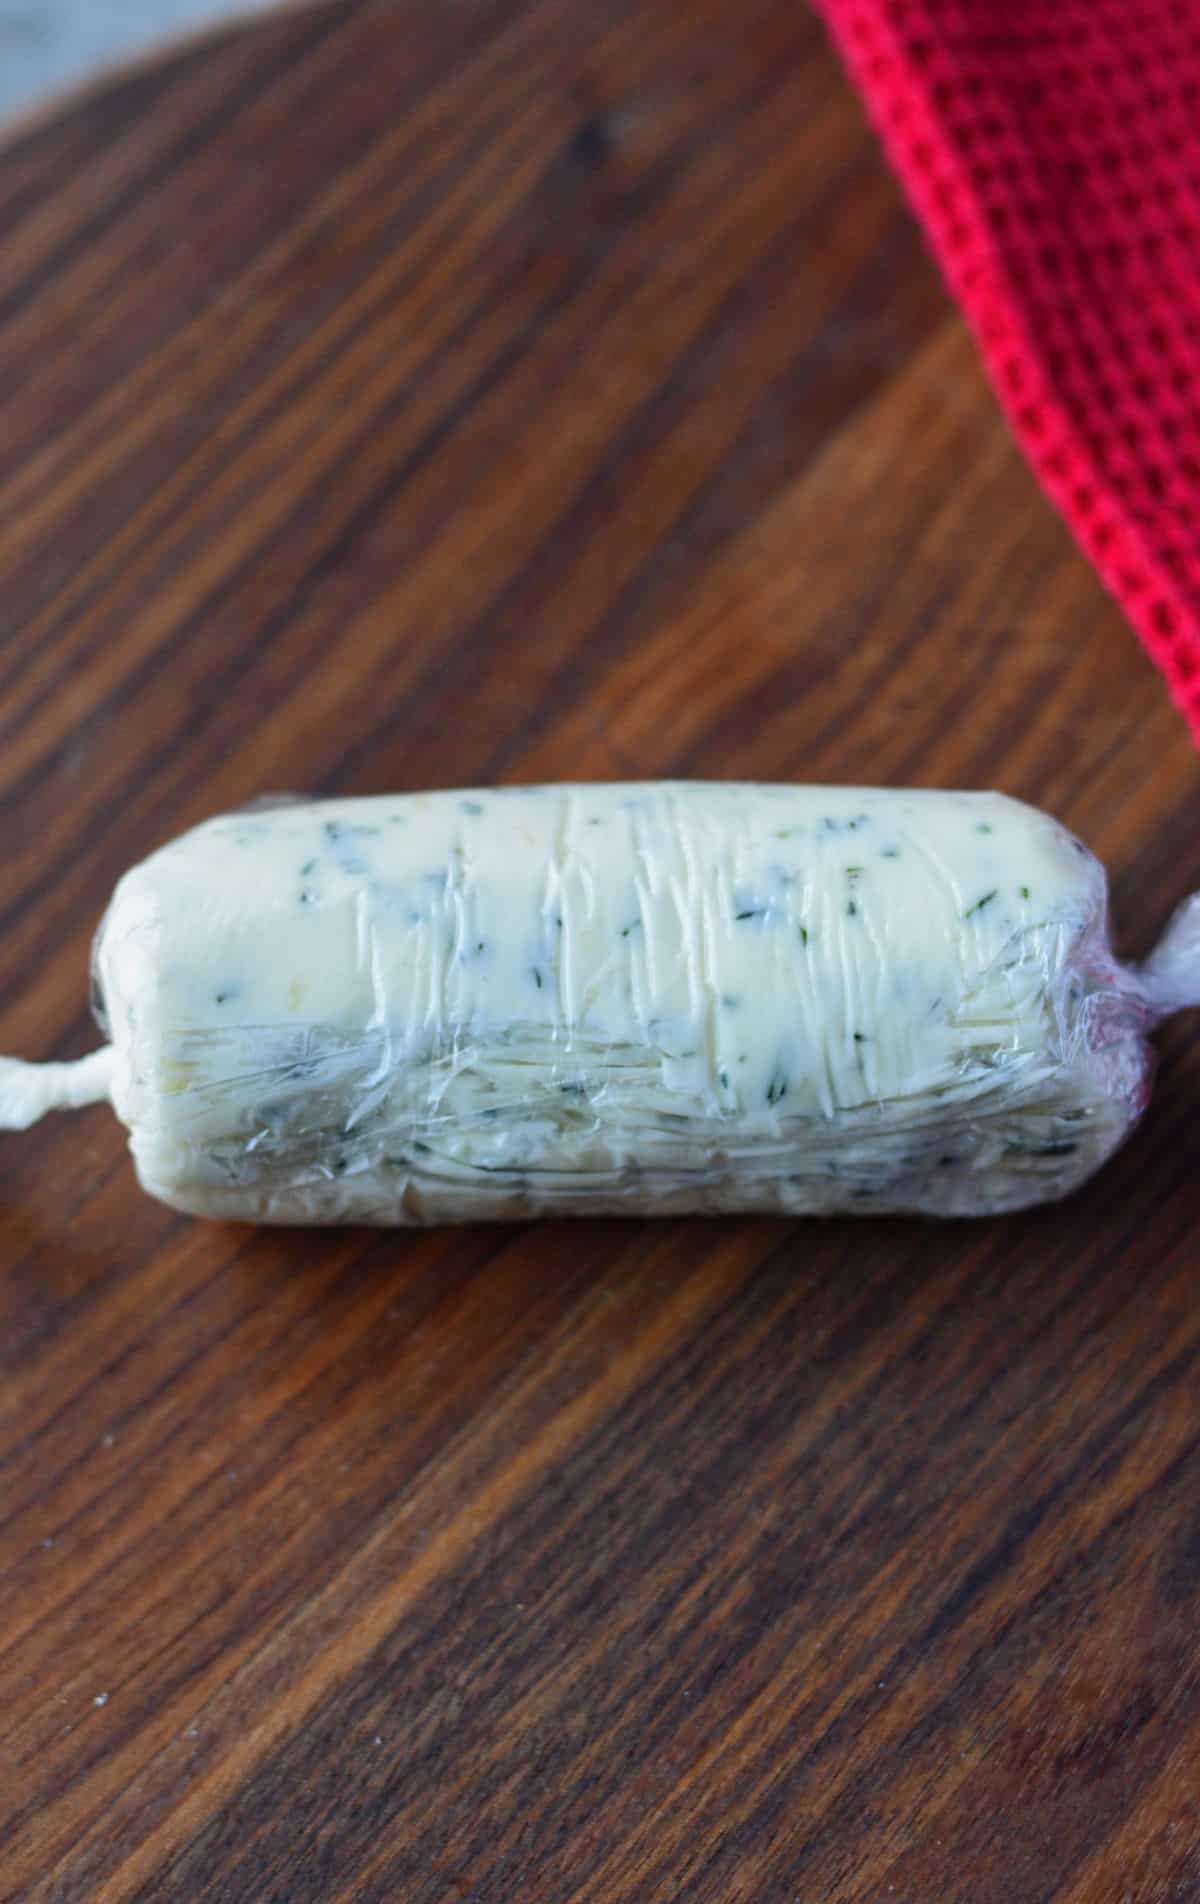 Garlic herb butter rolled up in plastic wrap.